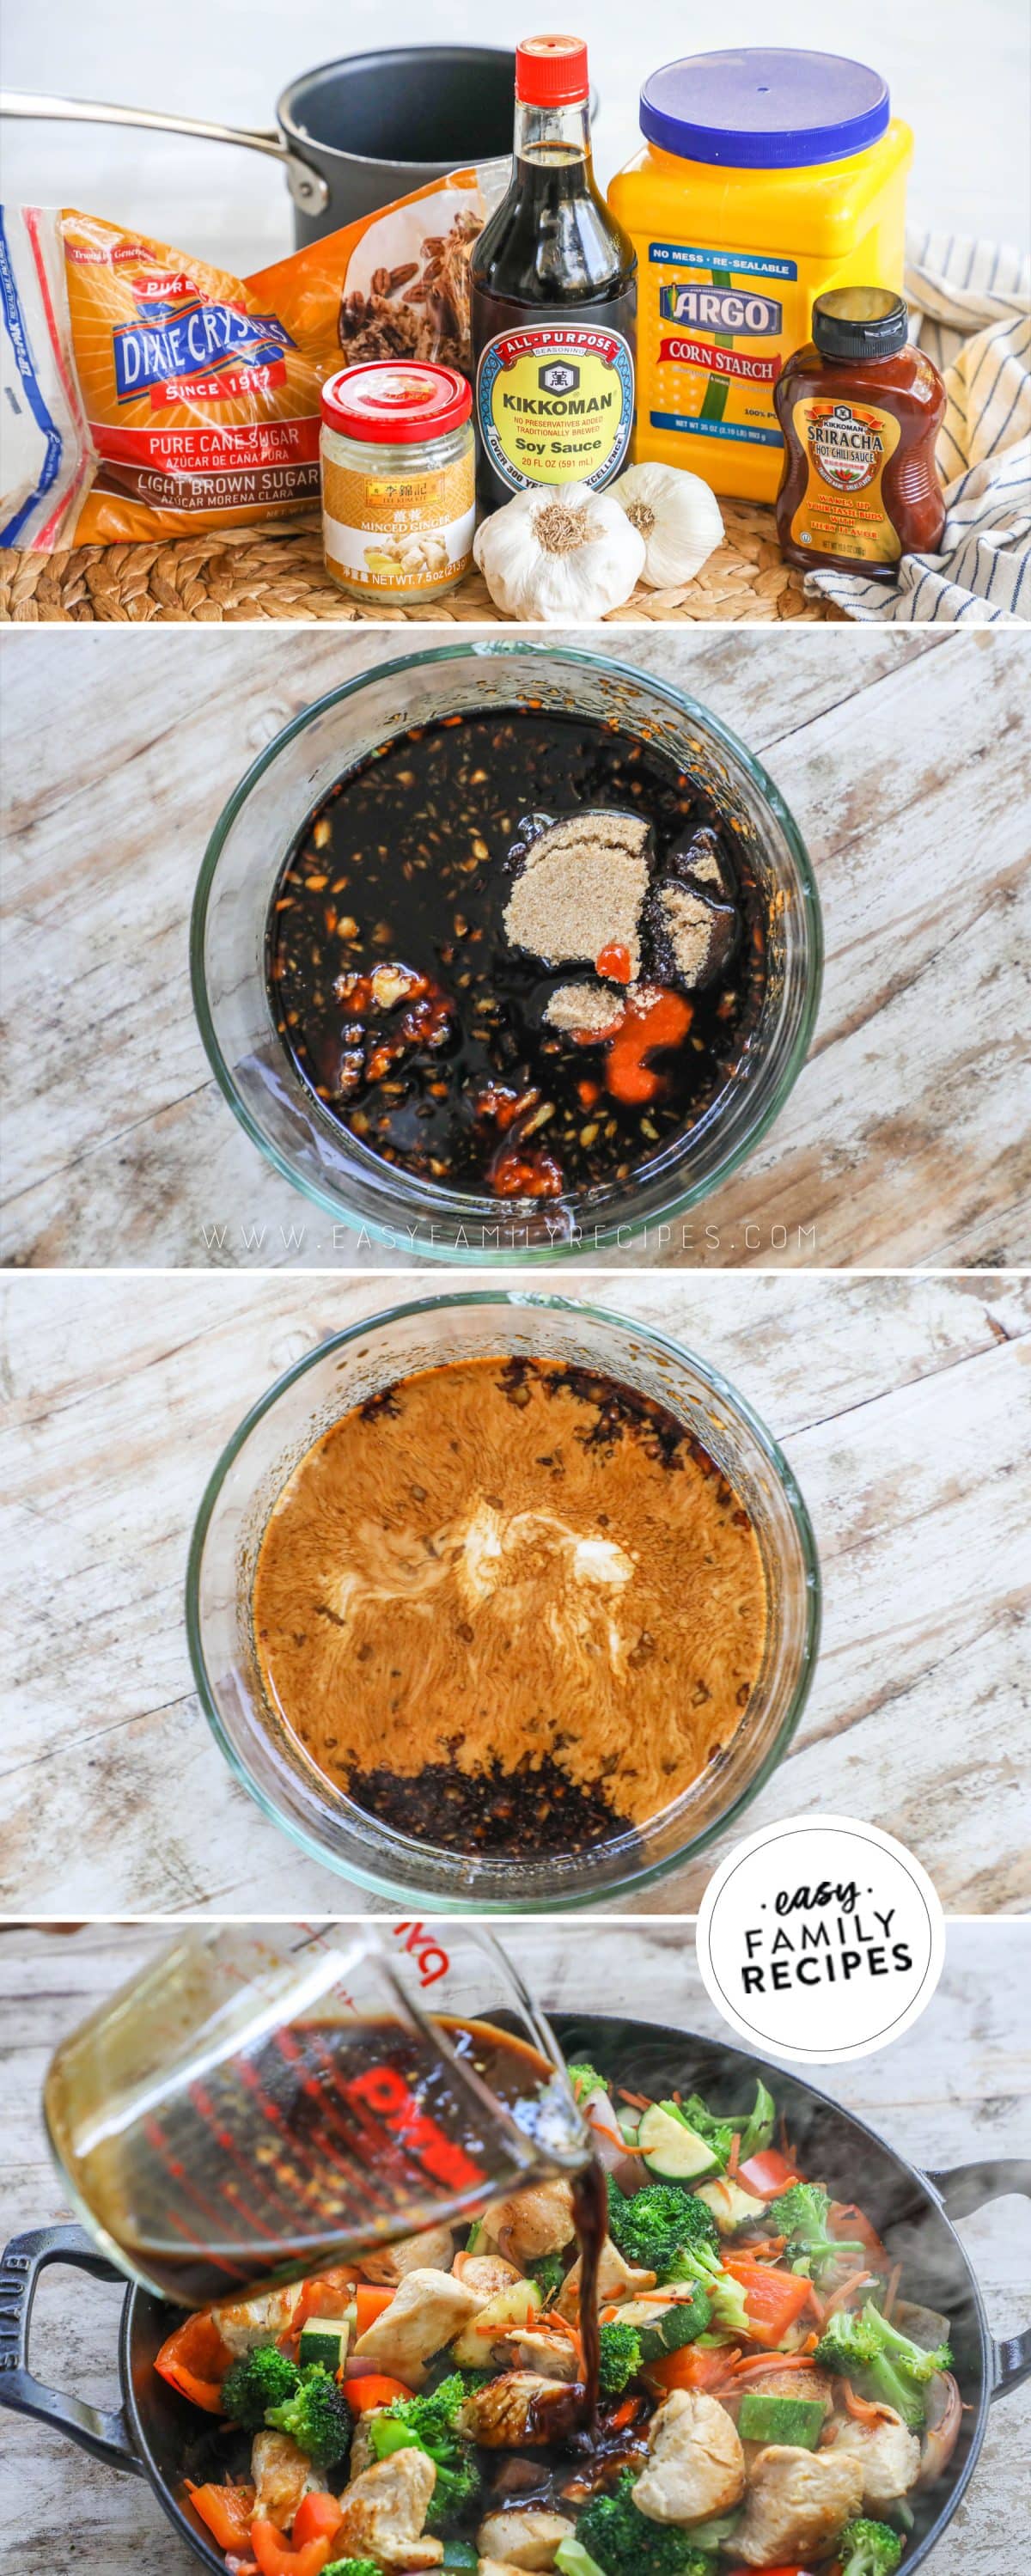 Process photos for how to make easy stir fry sauce- 1. gather the ingredients 2. combine all ingredients in a bowl and whisk together. 3. Add the cornstarch to the mixture. 4. Cook with meat and vegetables.